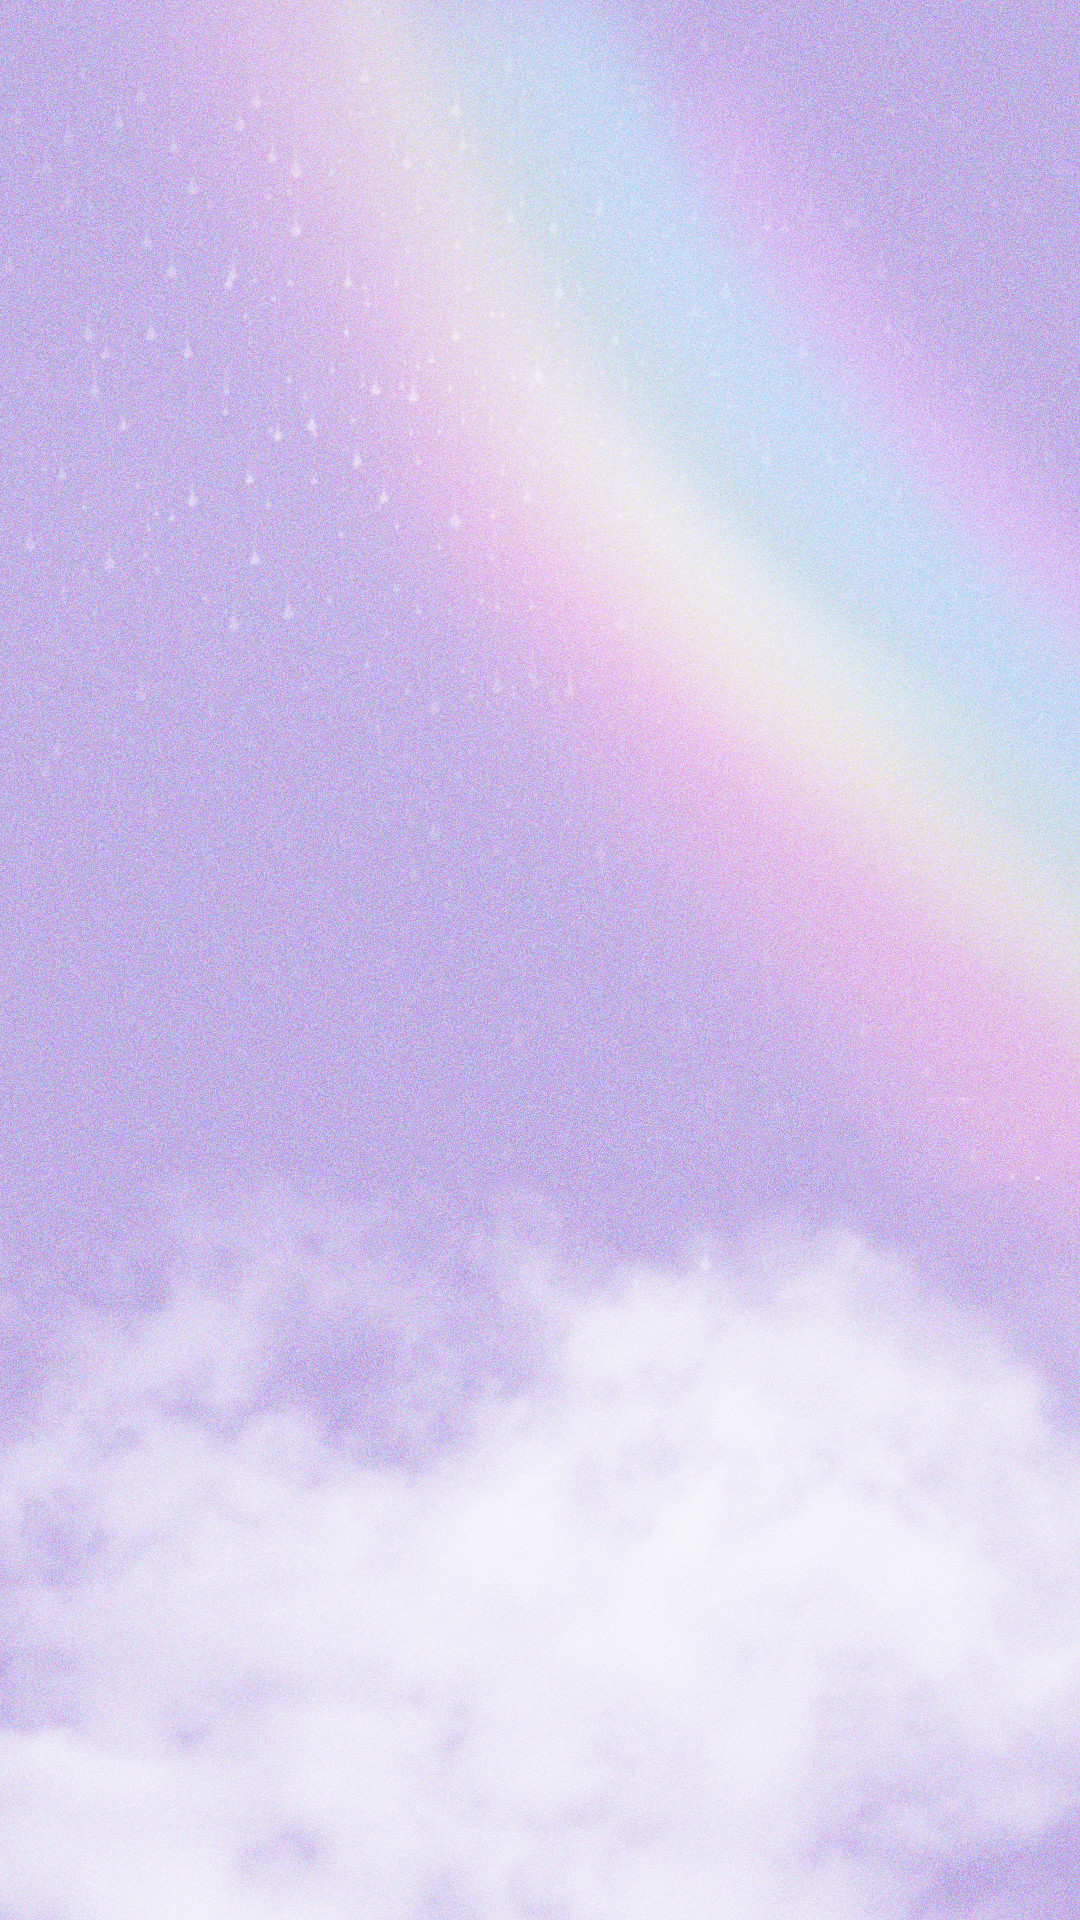 Pink Cute Rainbow Clouds Background Wallpaper Image For Free Download   Pngtree